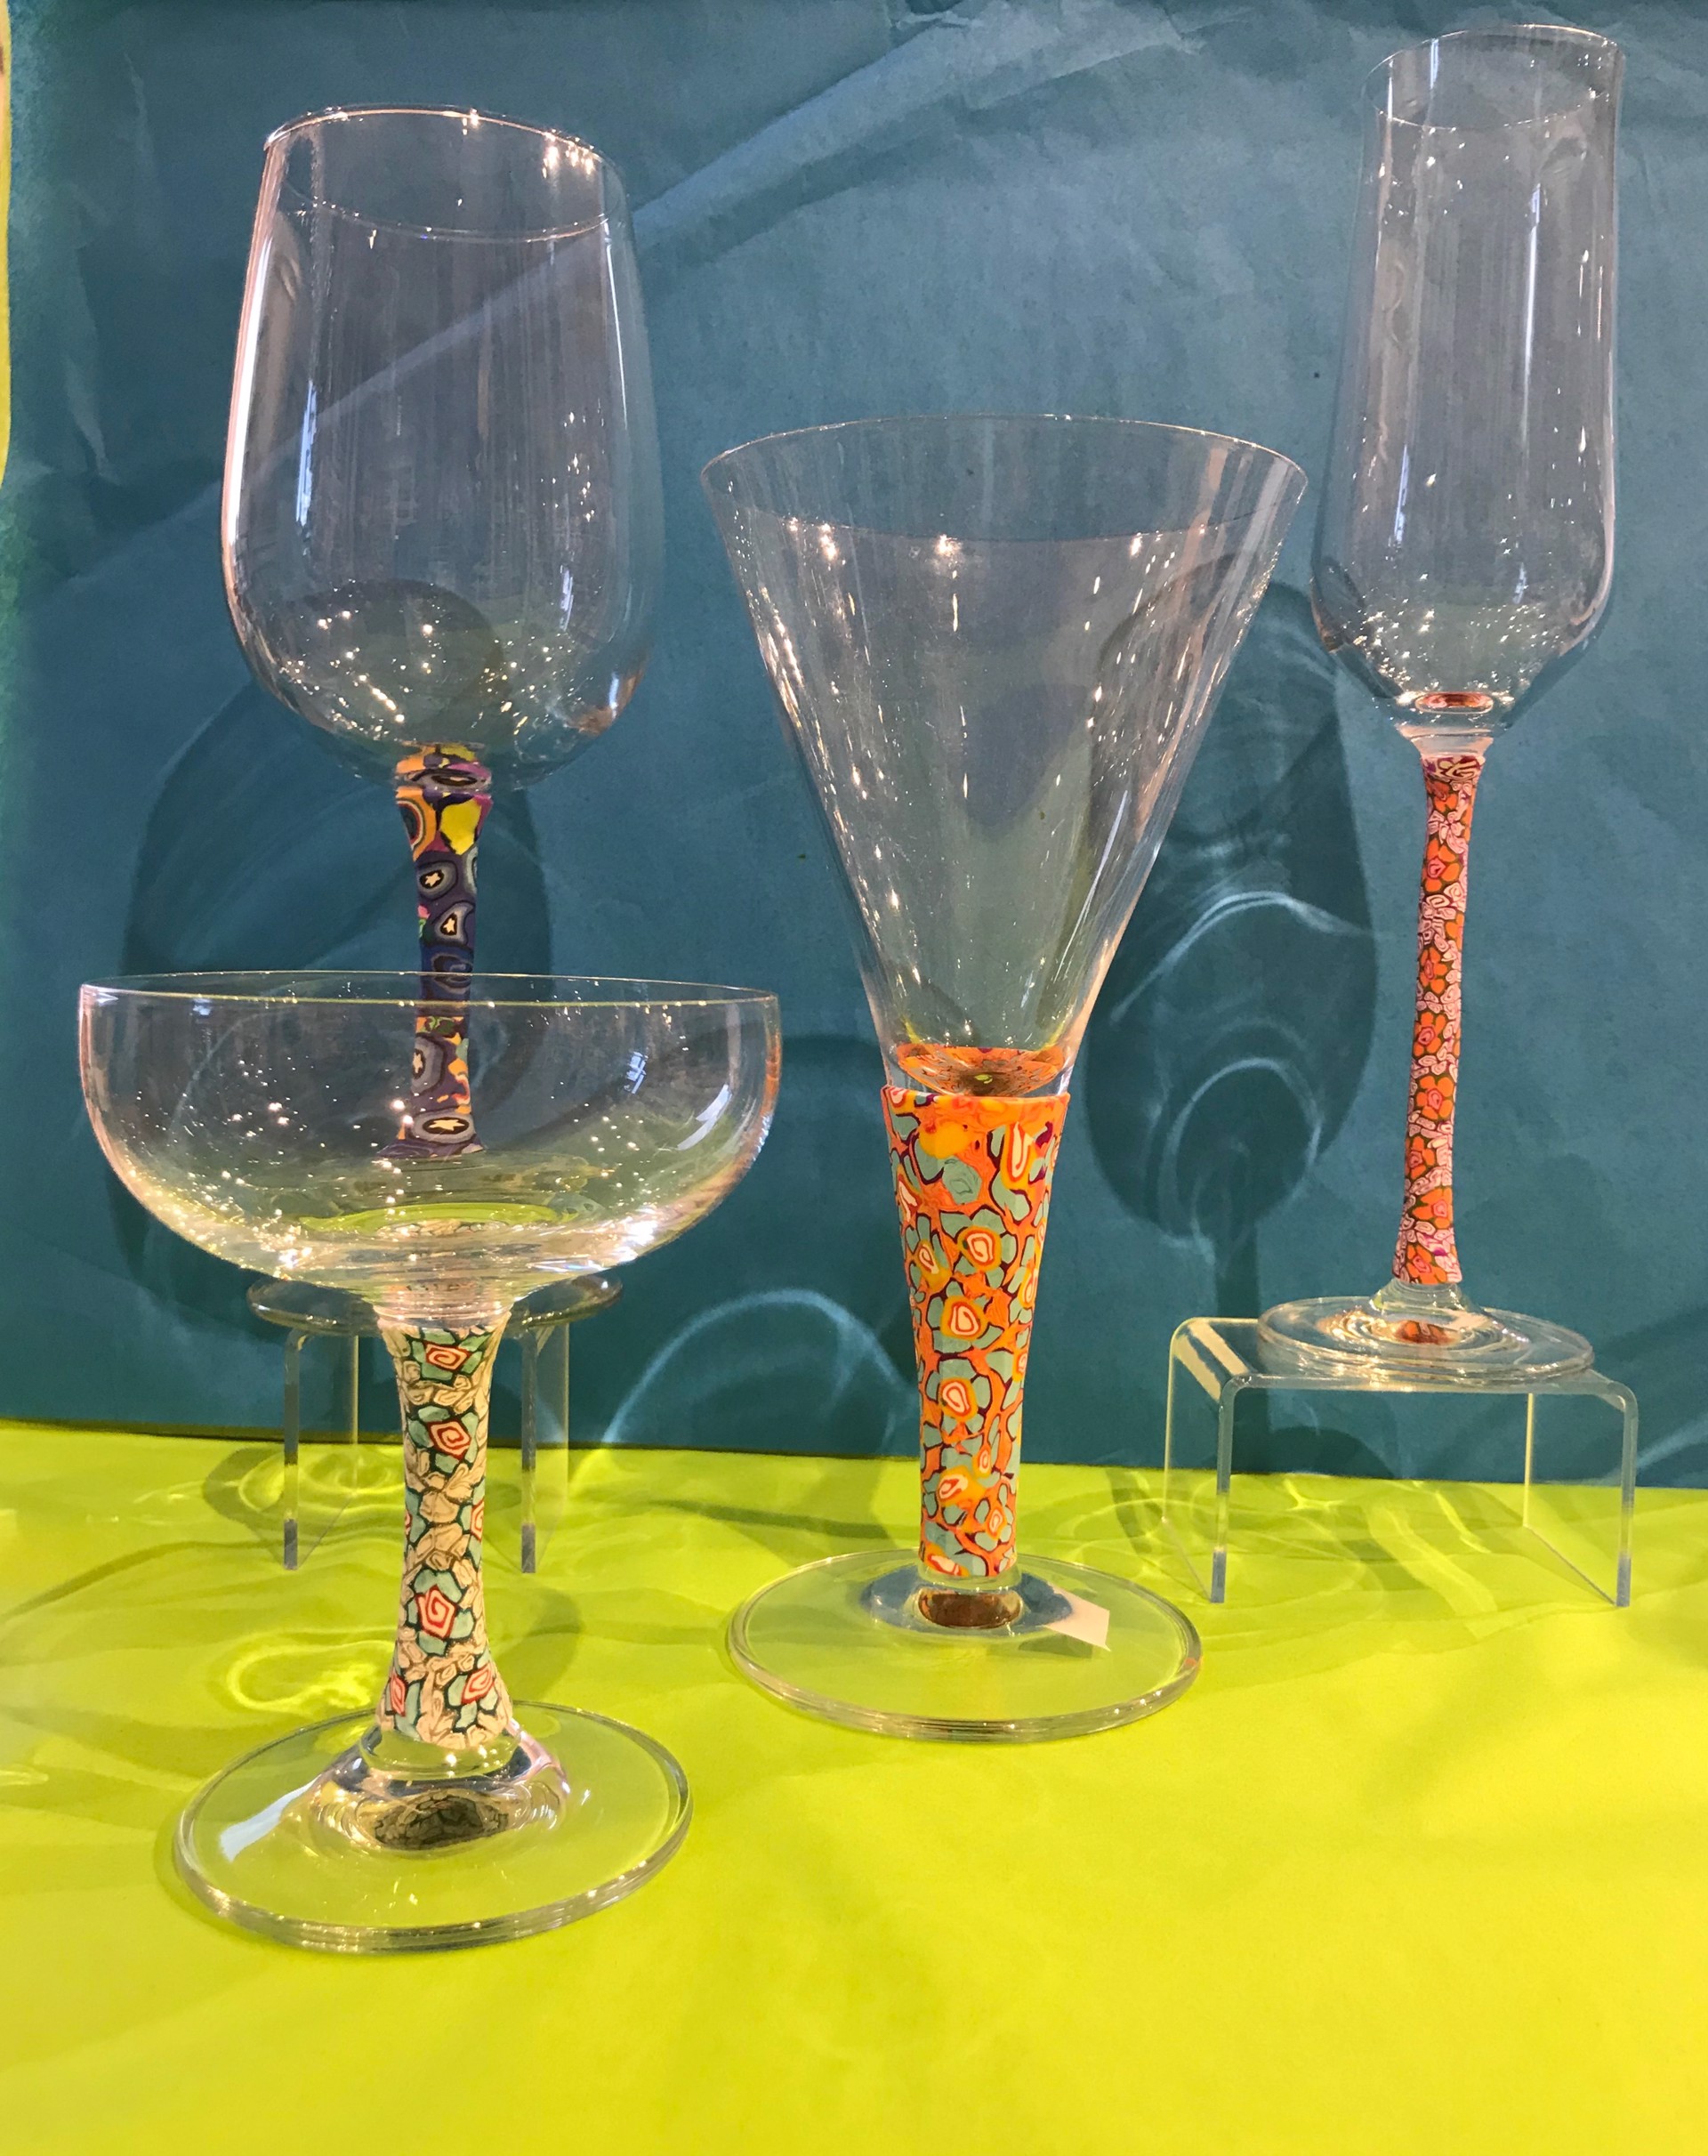 Wine Glasses by Samantha Long A (History ~ Inactive)